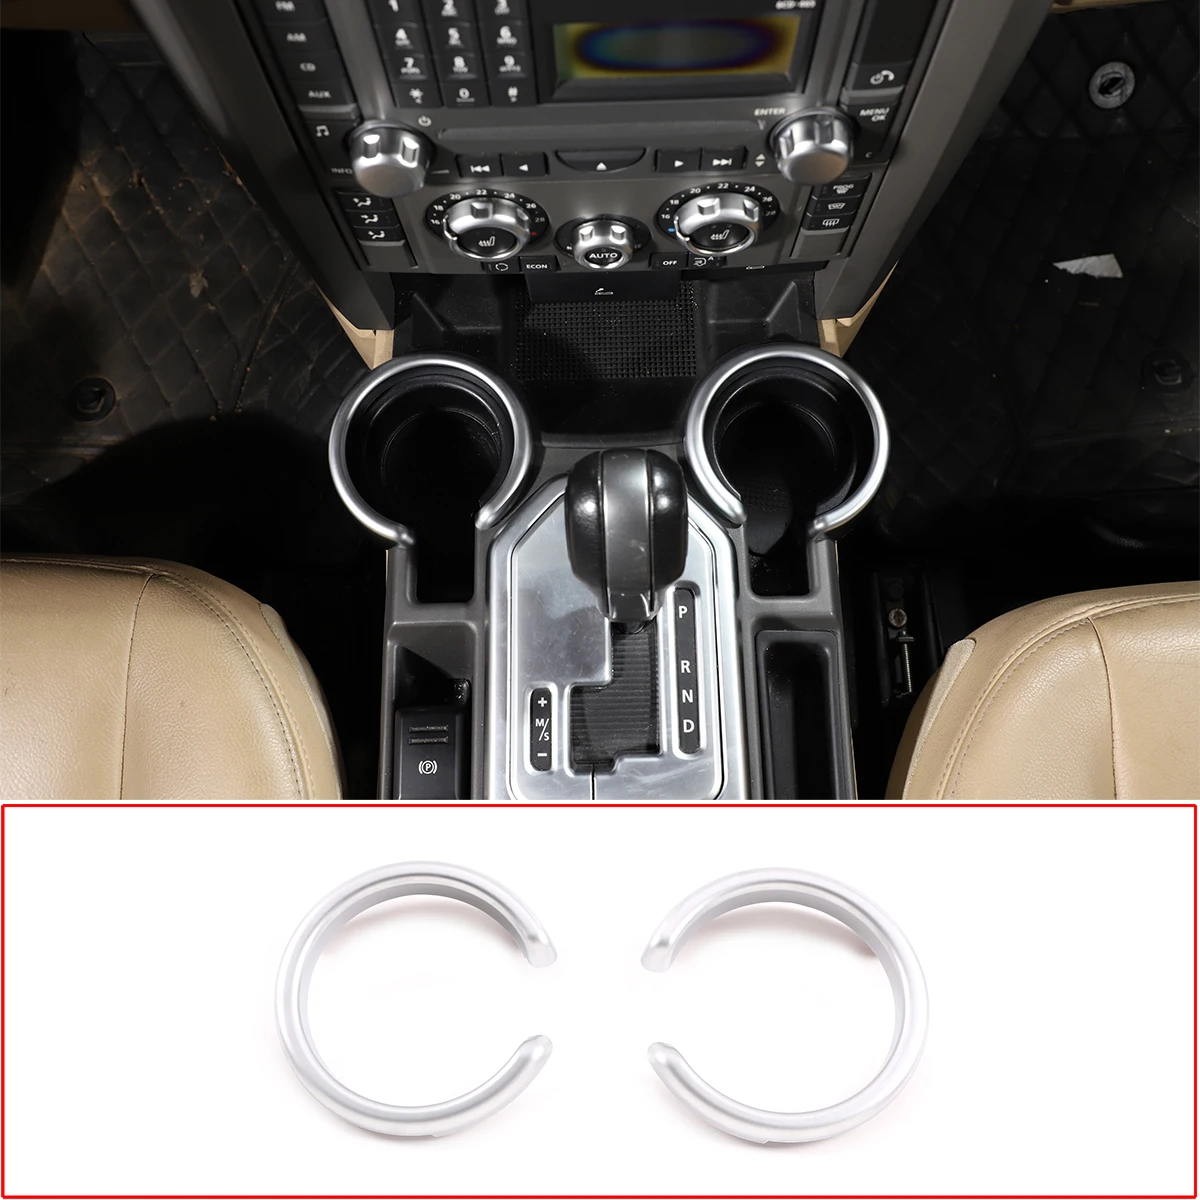 

ABS Chrome Car Center Console Water Cup Holder Ring Cover Trim Decorate Accessories For Land Rover Discovery 3 LR3 L319 04-2009